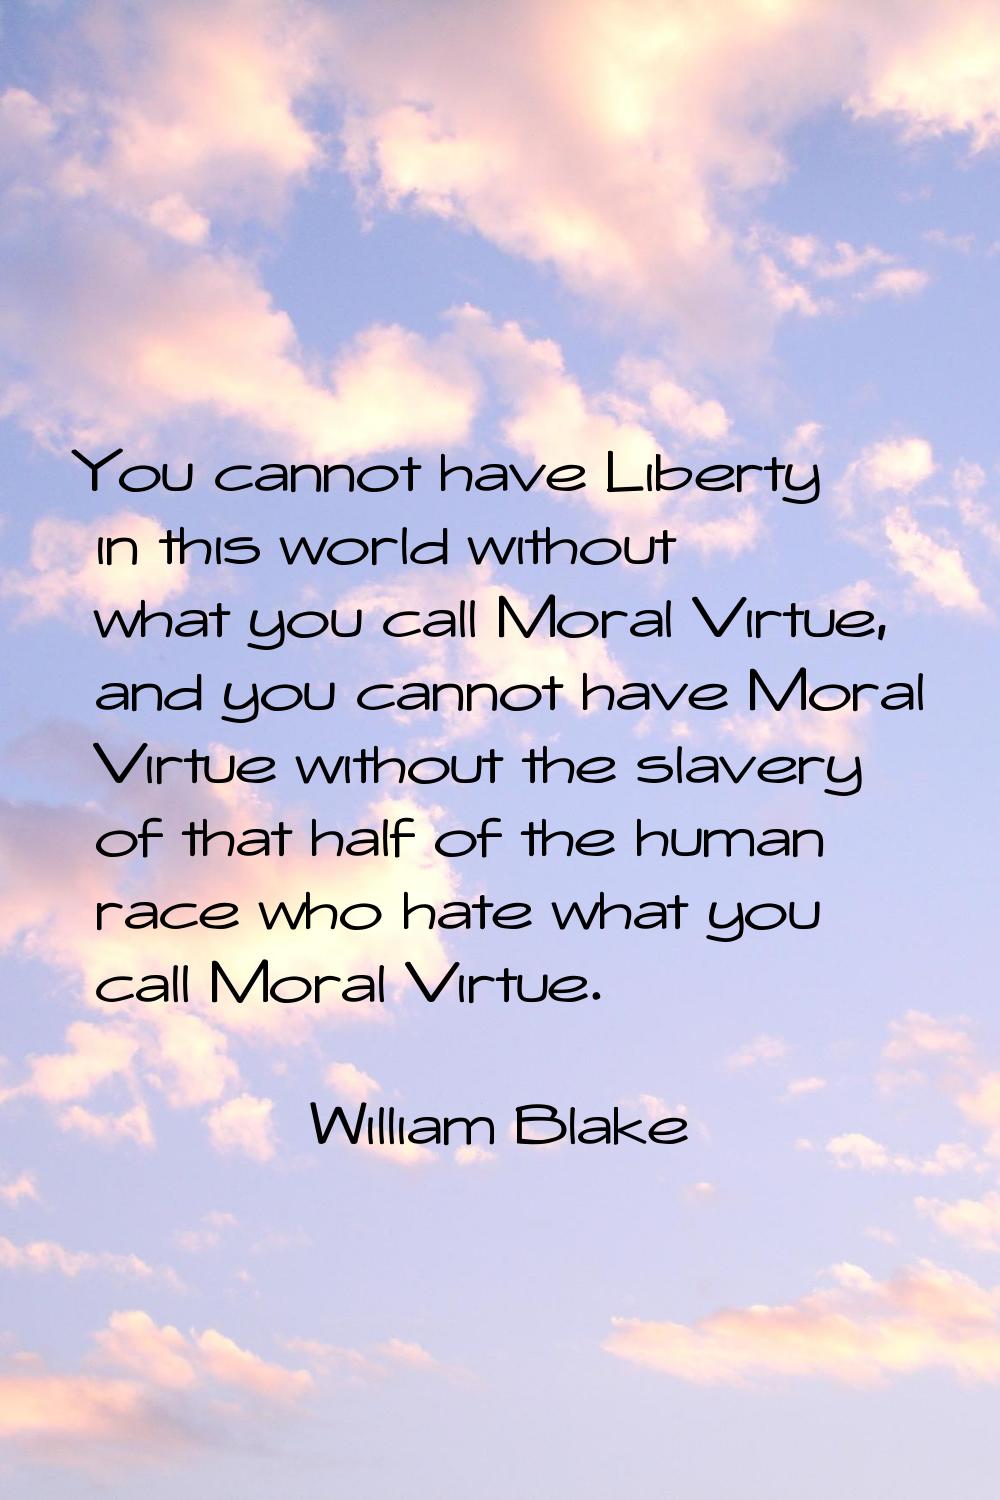 You cannot have Liberty in this world without what you call Moral Virtue, and you cannot have Moral